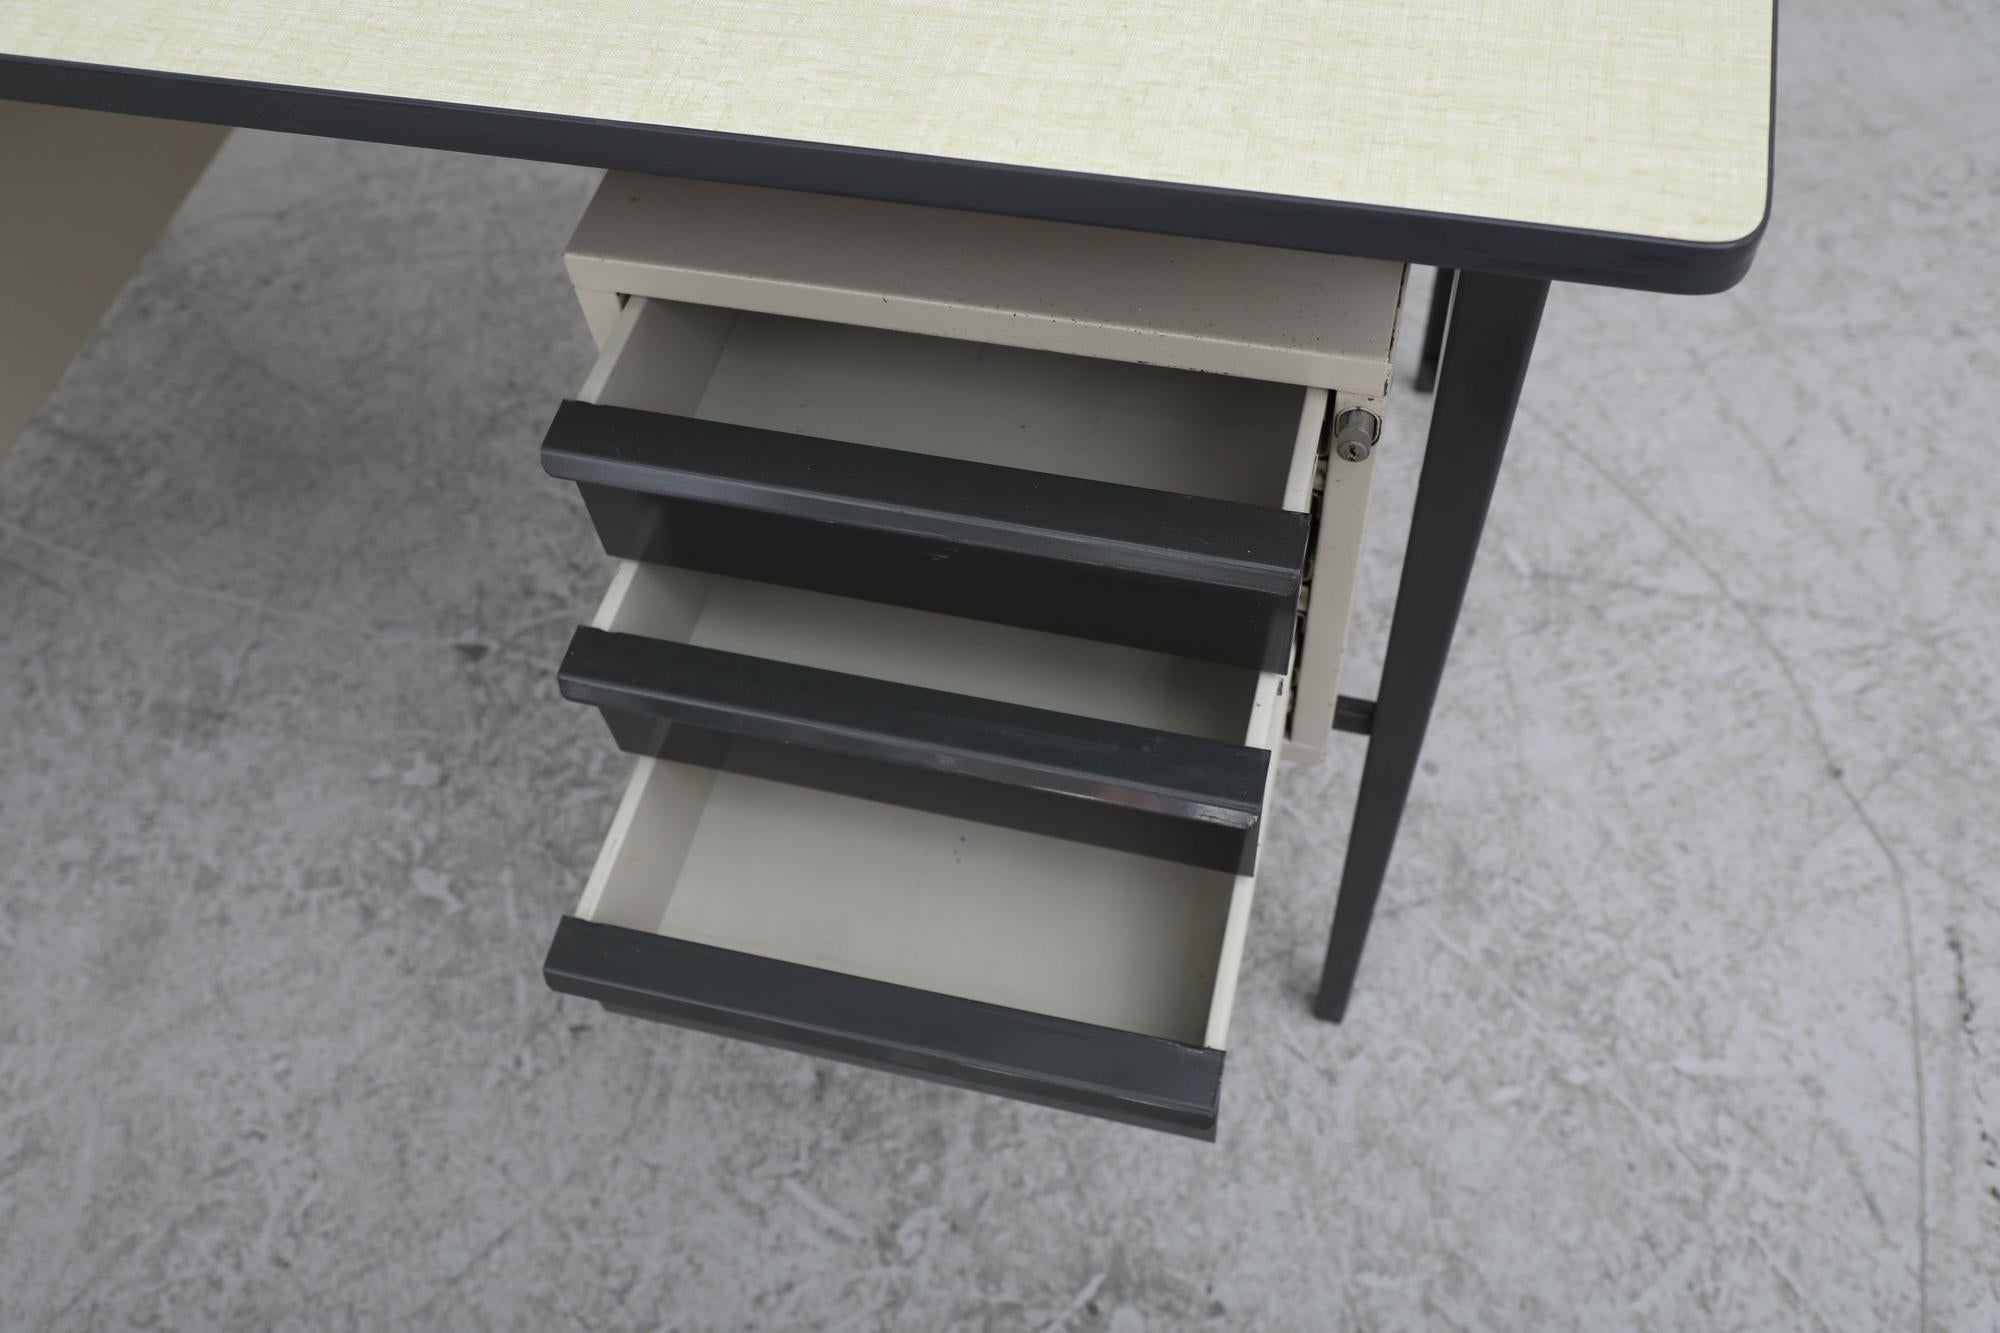 Enameled Mid-Century Prouve Inspired Industrial Desk by Marko